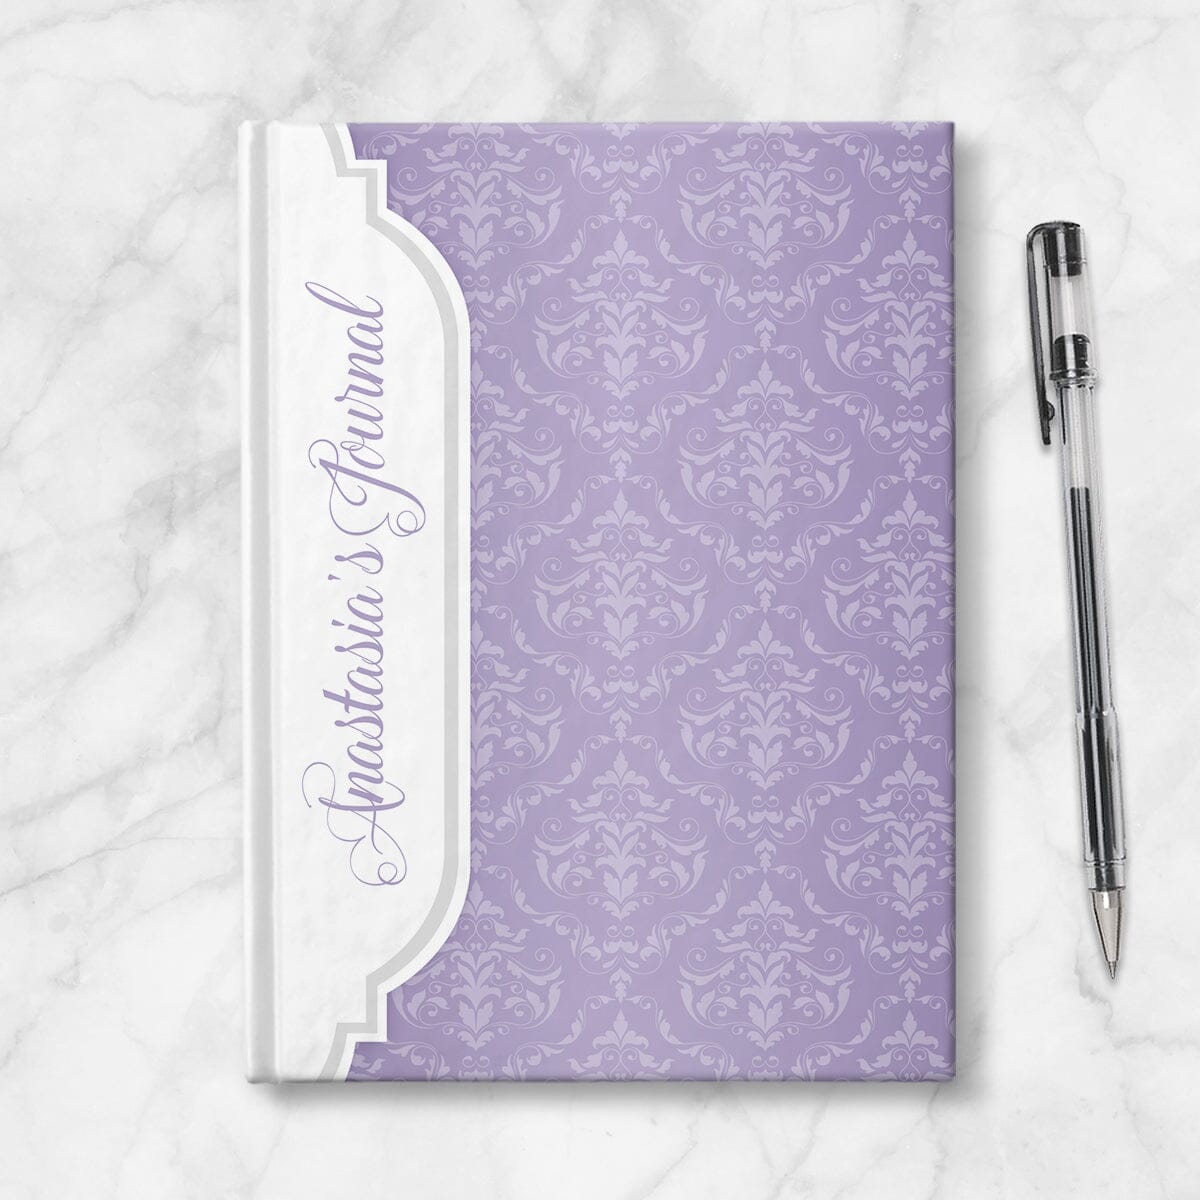 Personalized Purple Damask Journal at Artistically Invited. Image shows the book on a countertop next to a pen.